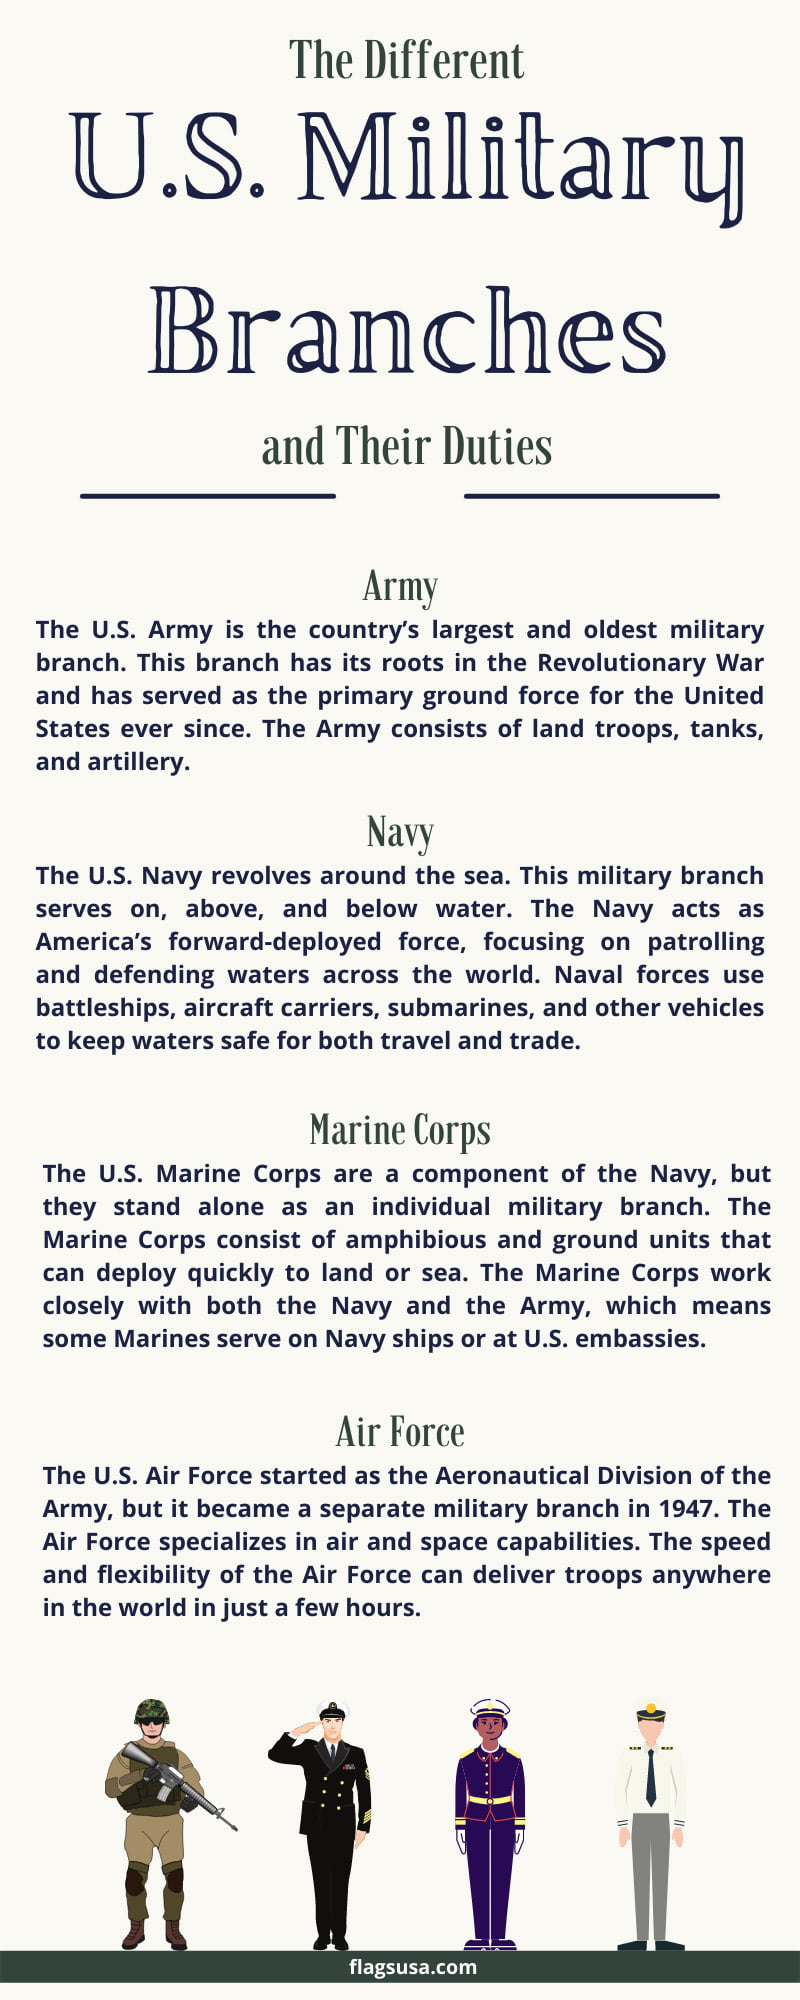 The different u. S. Military branches and their duties